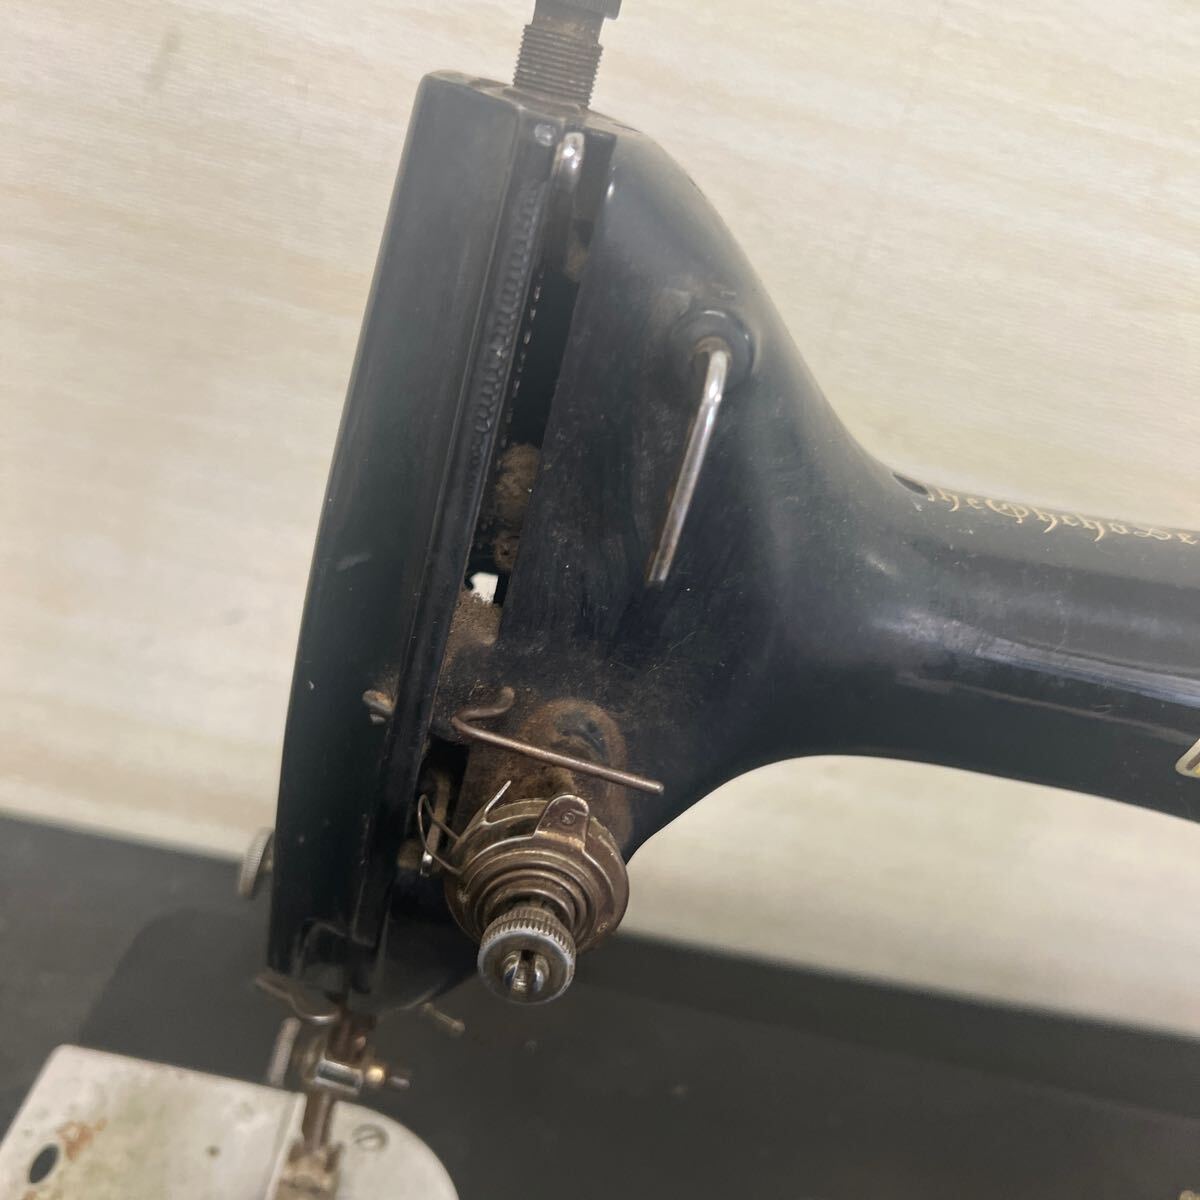 t5-32 OHCHO stepping sewing machine body only antique sewing machine retro Vintage display ornament interior storage goods 